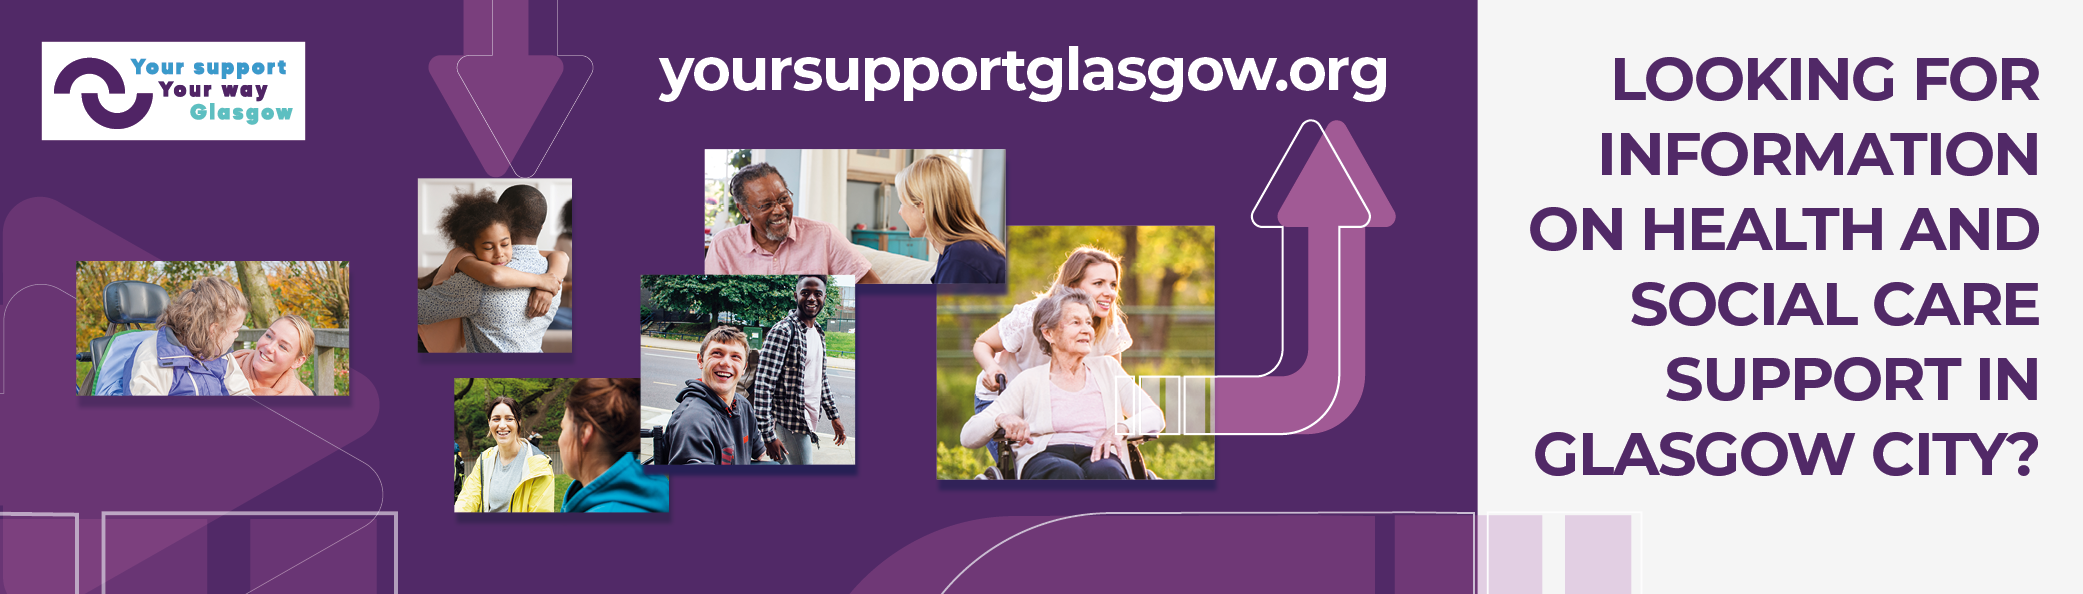 Link to Your Support Your Way Glasgow